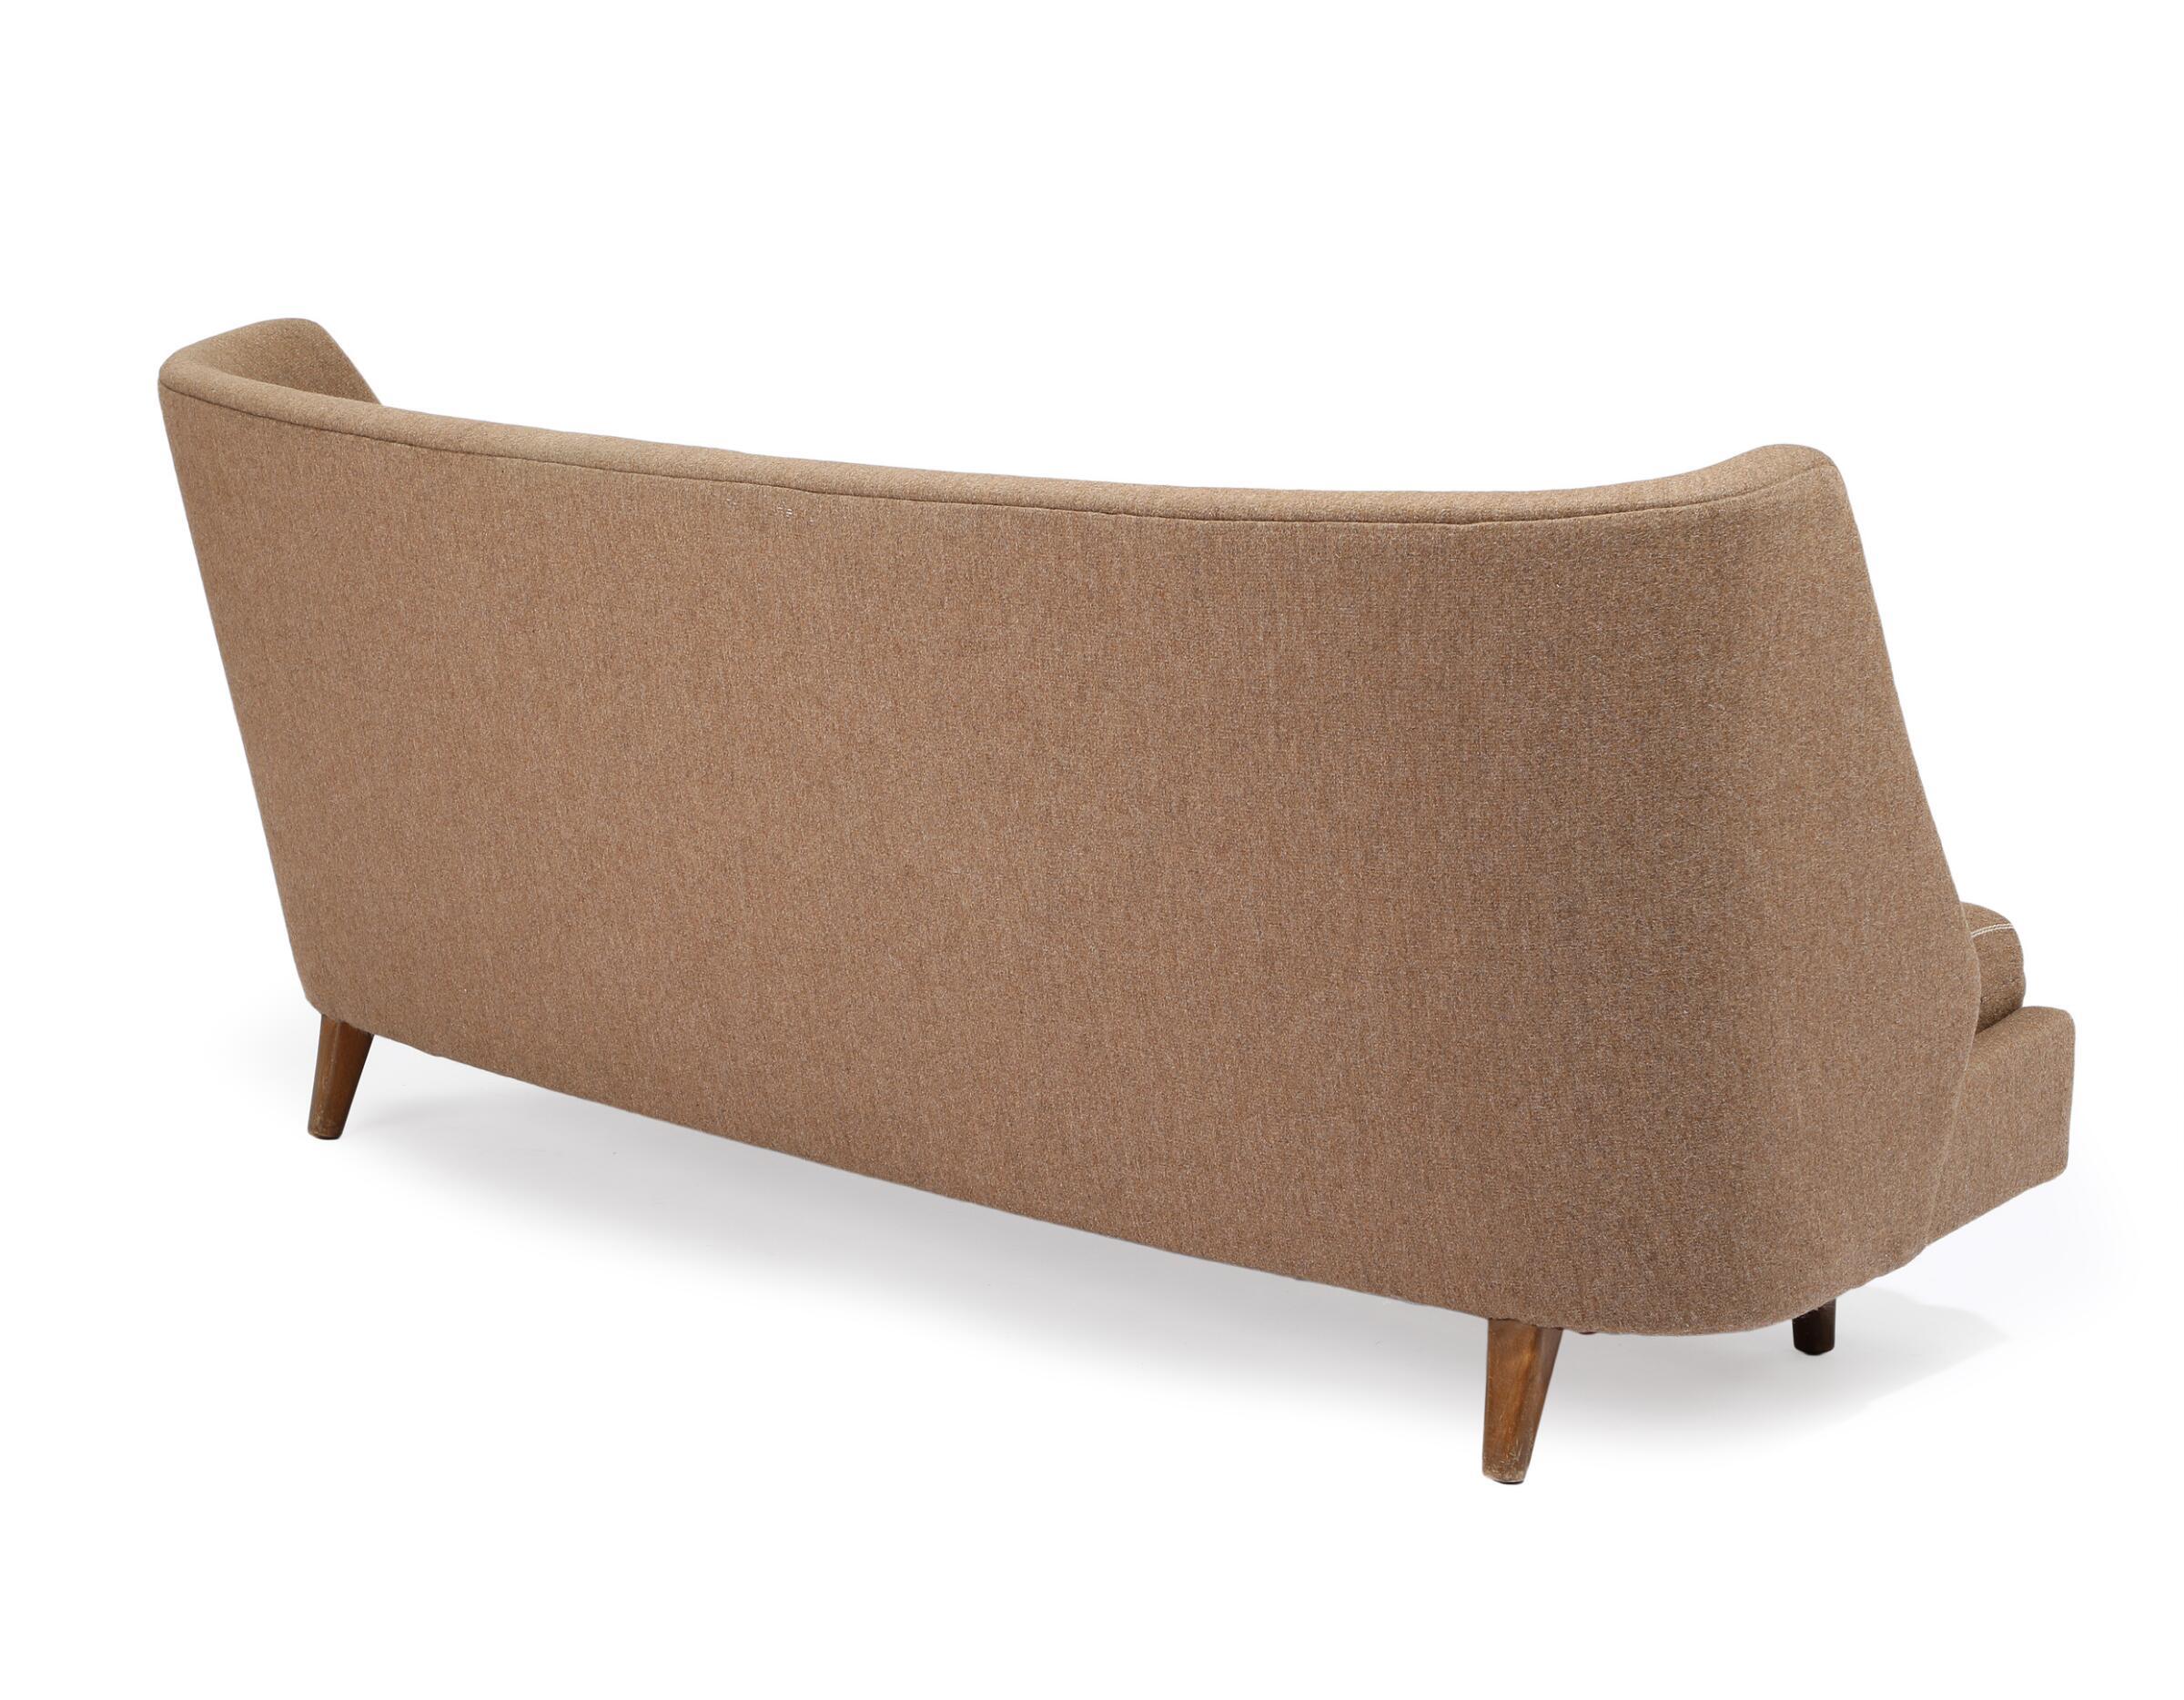 Rare and vey cool three-seater sofa in slightly curved shape with stained beech legs designed by Arne Wahl Iversen in the mid-1950s and made by Hans Hansen sometime in the early 1970's. The design bears a strong resemblance to Iversen's 